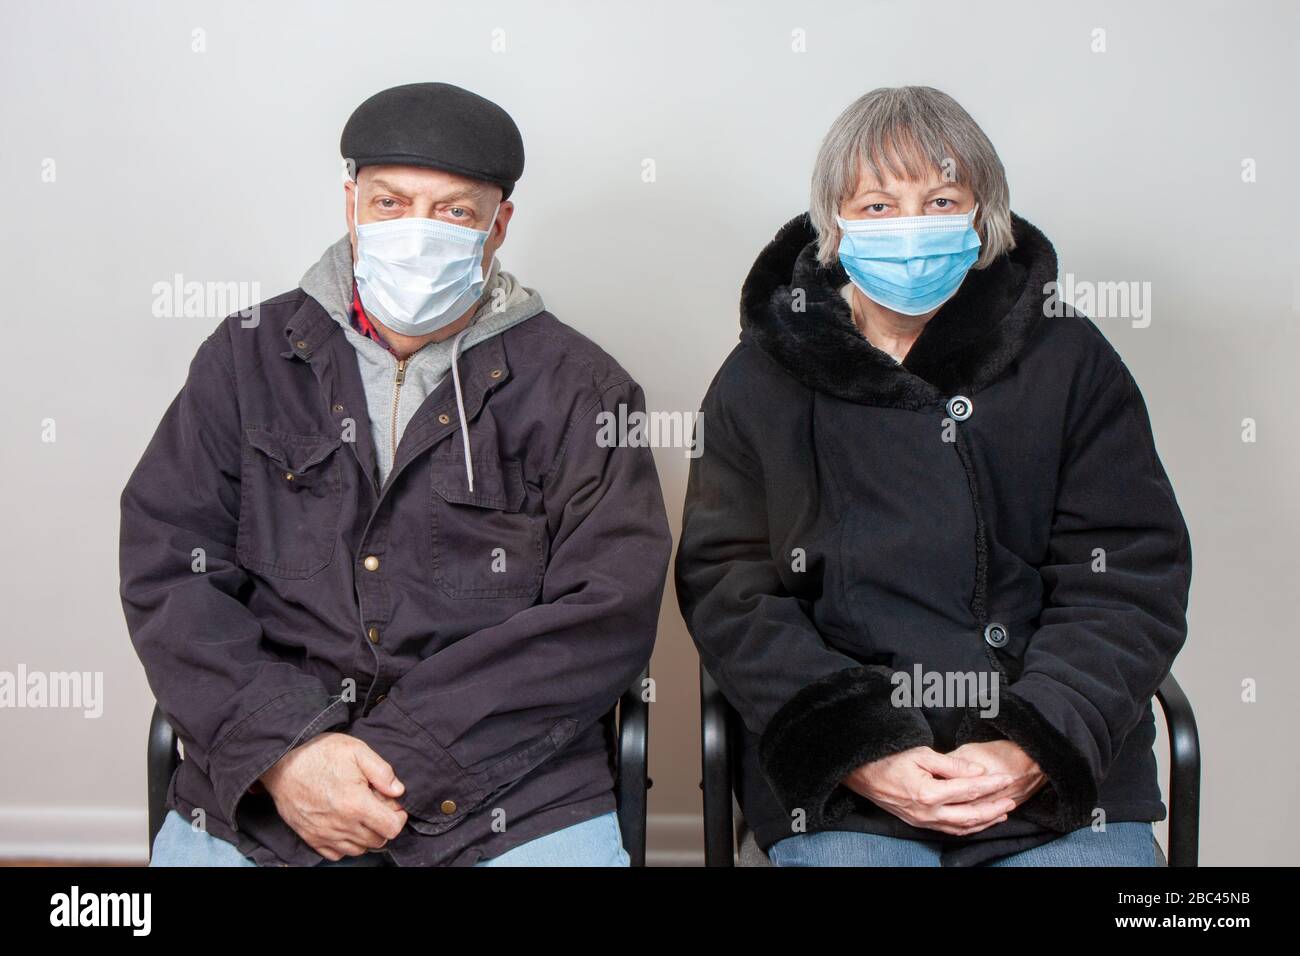 Senior Citizen Couple Wearing Face Masks In Waiting Room Stock Photo